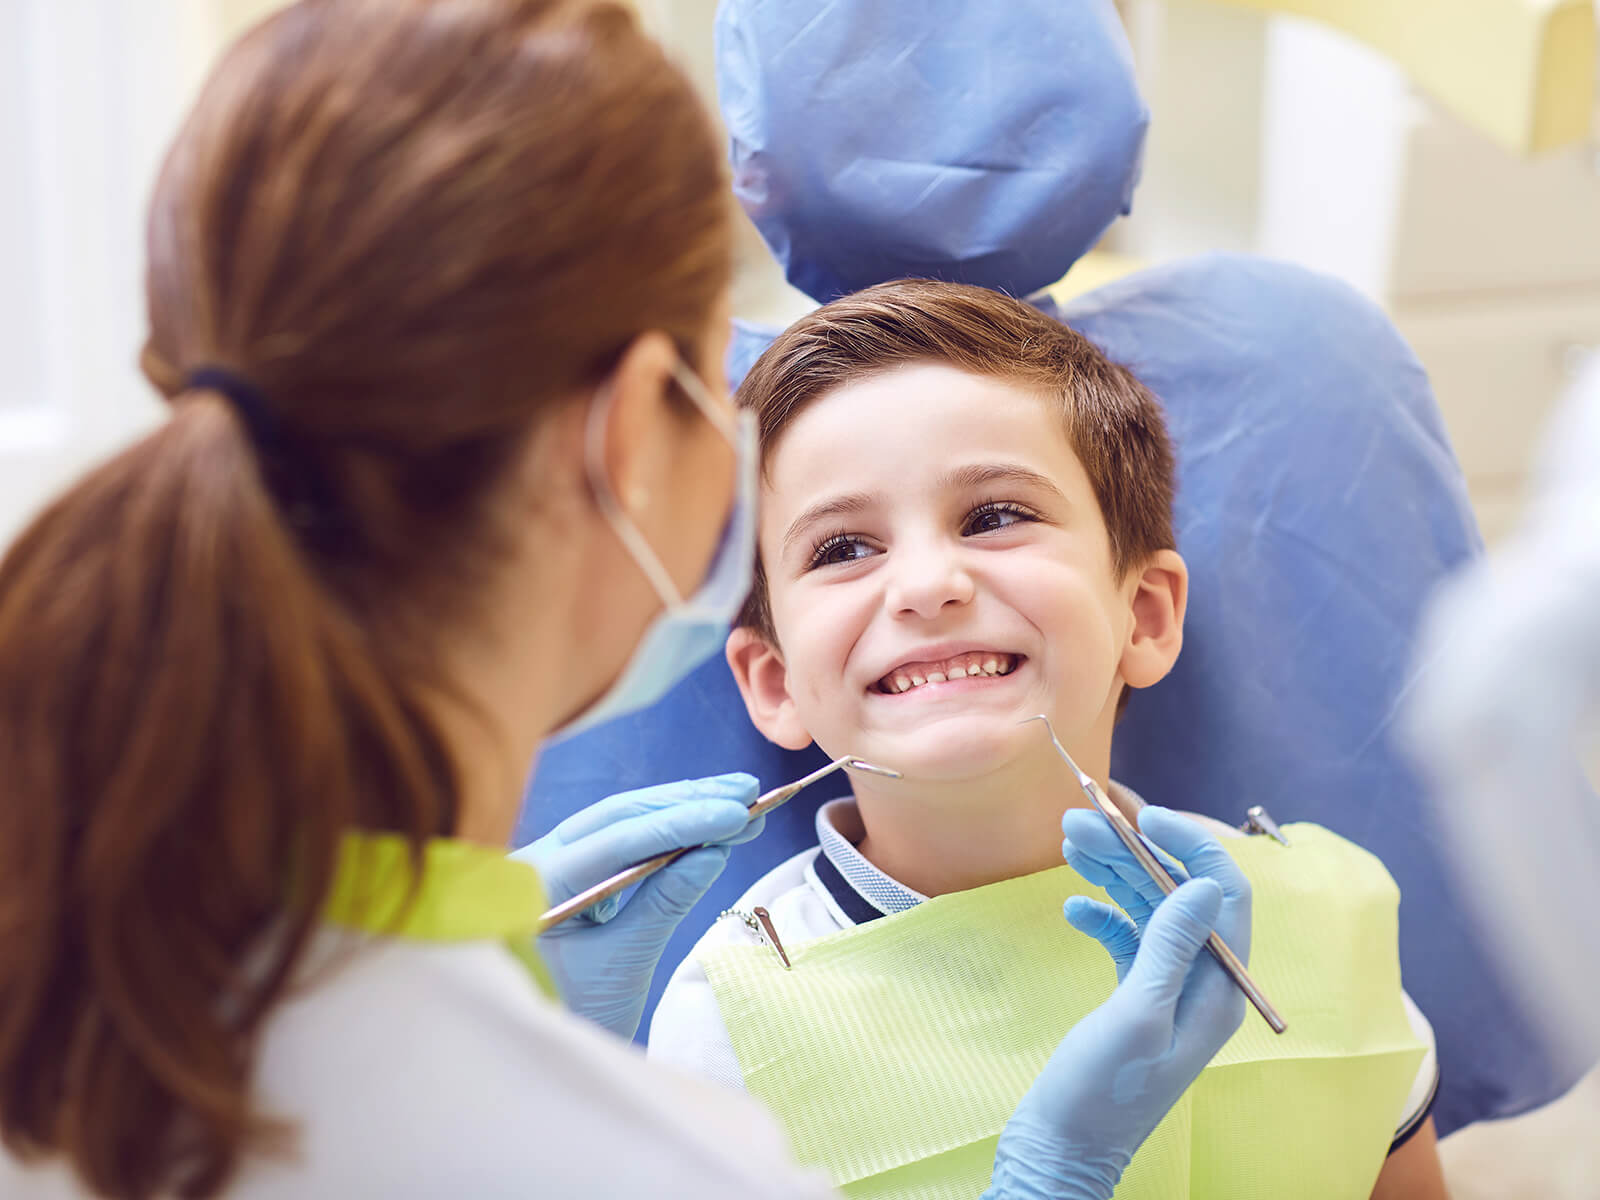 Emergency Dental Care For Children: What Parents Need To Know